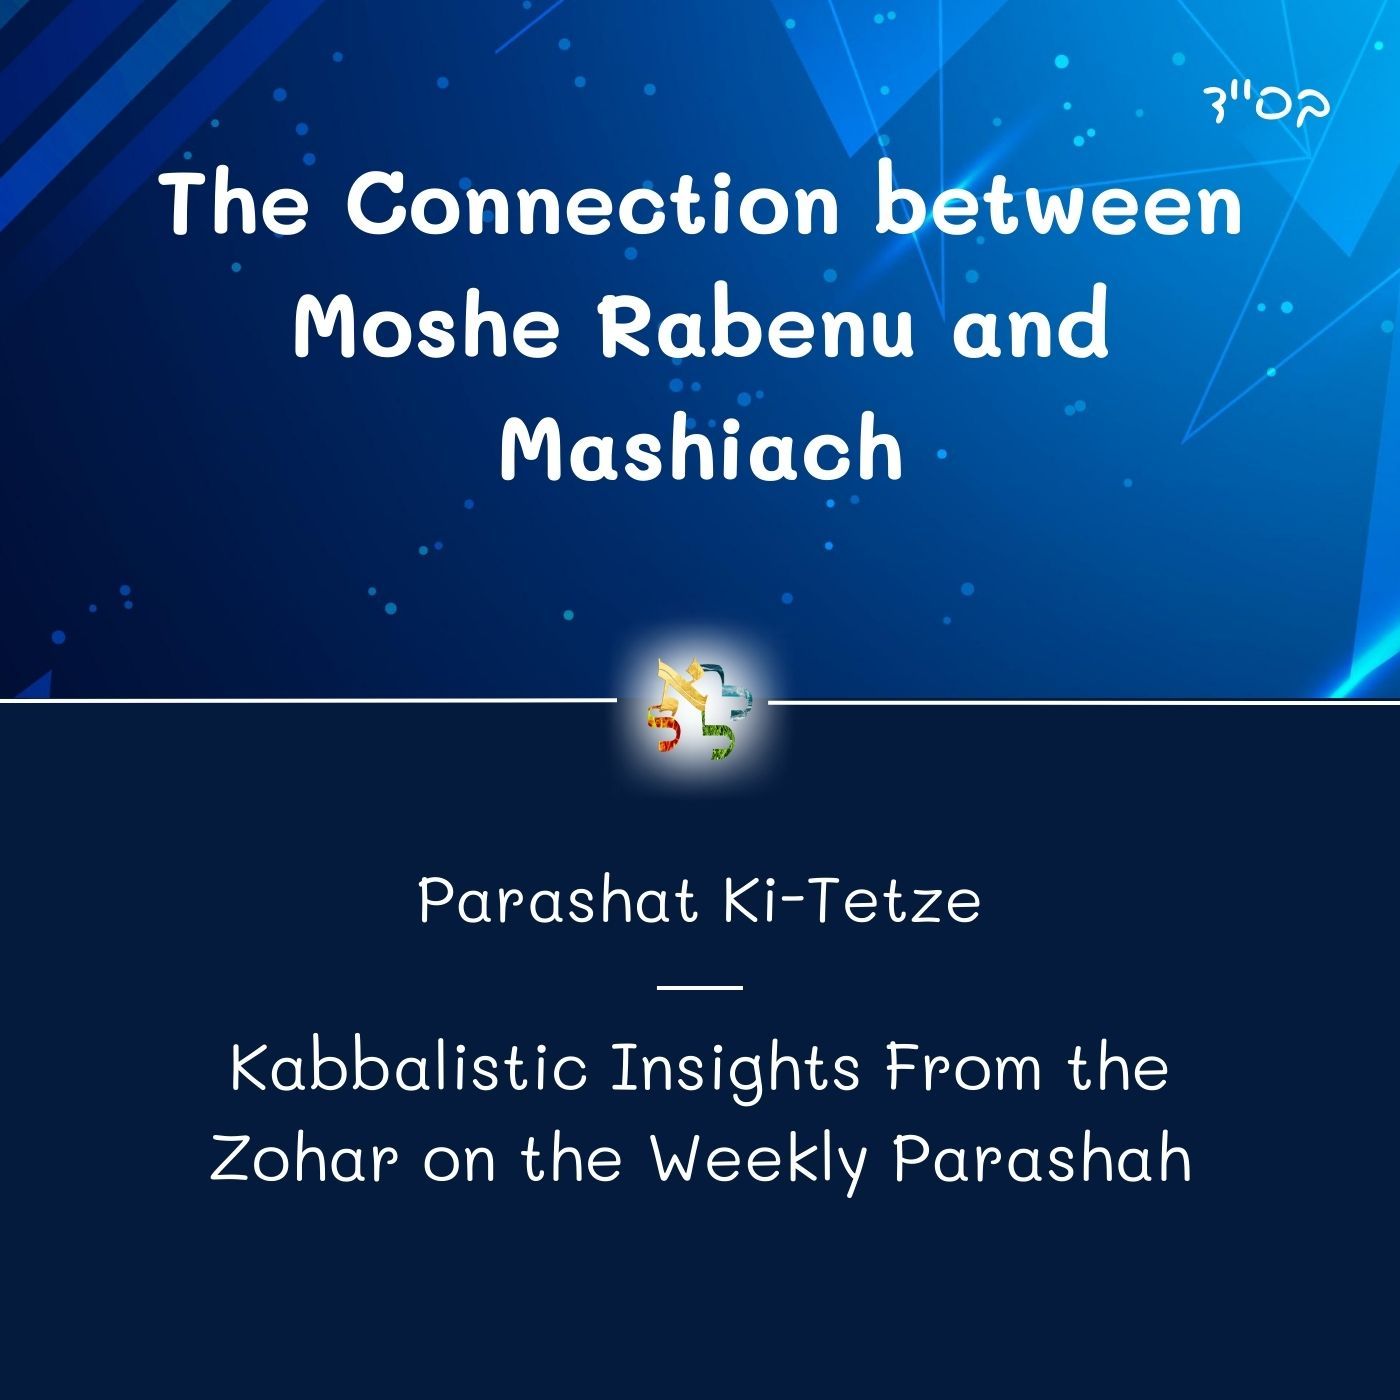 The Connection between Moshe Rabenu and Mashiach - Kabbalistic Inspiration on the Parasha